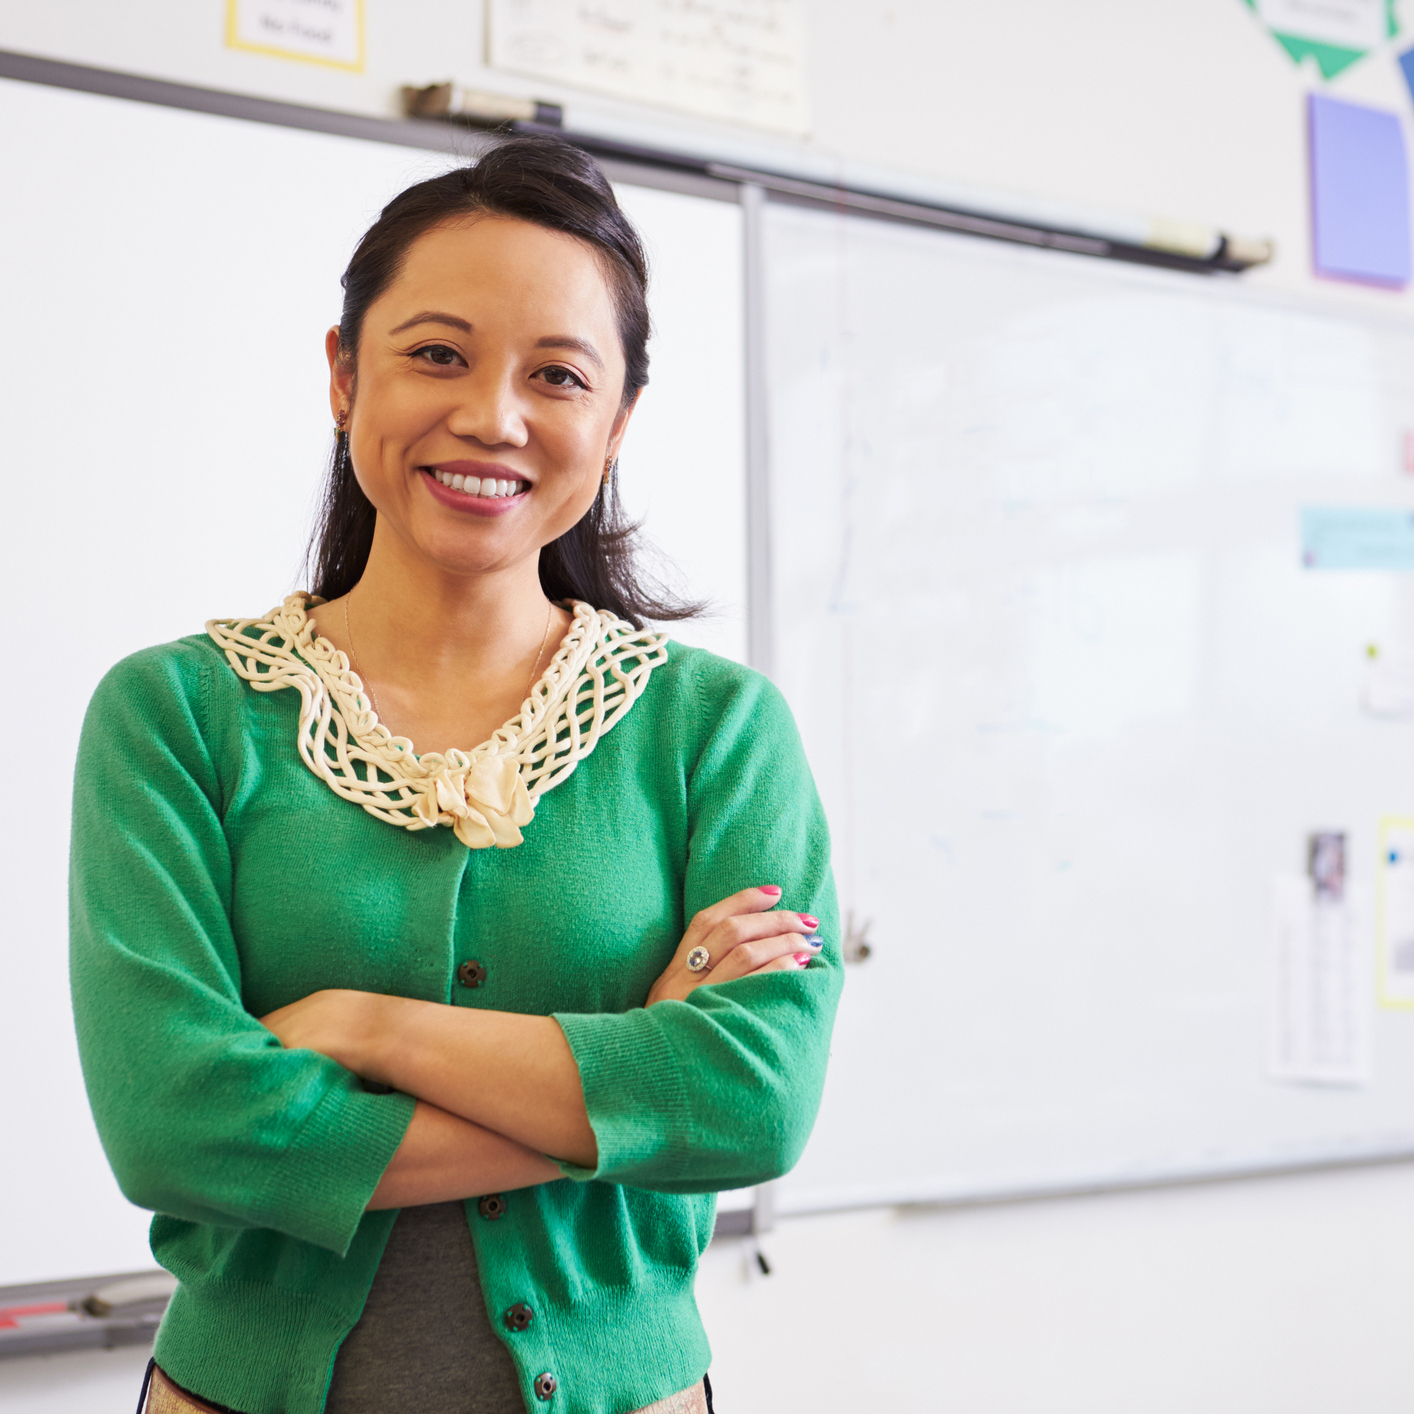 A teacher smiles at the camera in front of a whiteboard.